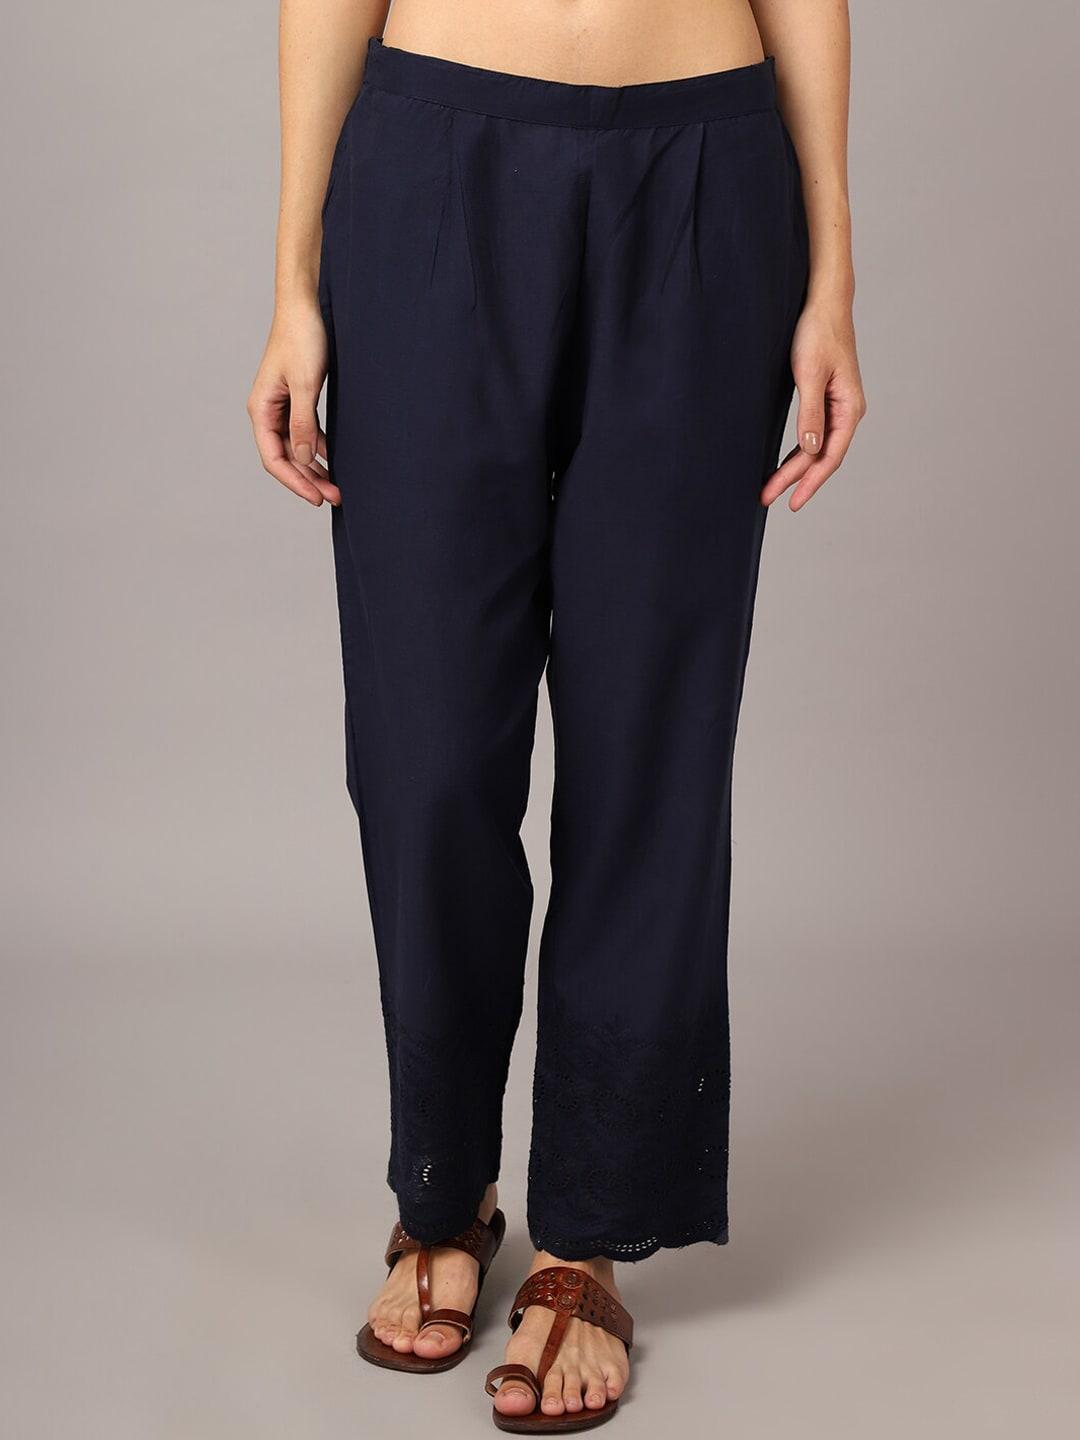 cantabil-women-navy-blue-casual-trousers